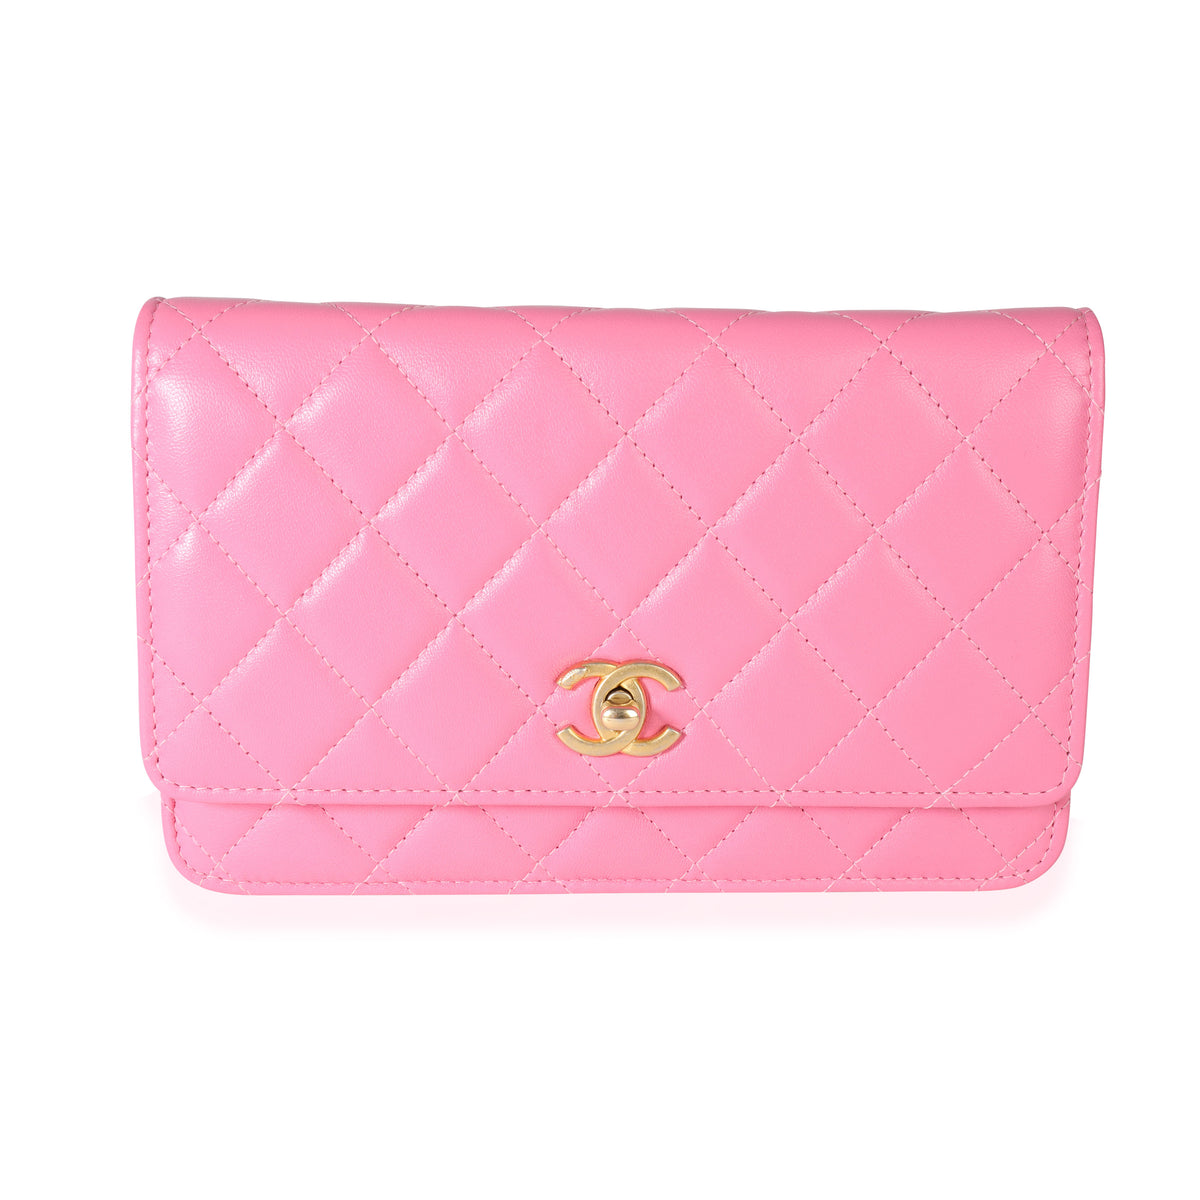 Chanel Pearl Crush Wallet on Chain l My First Chanel 